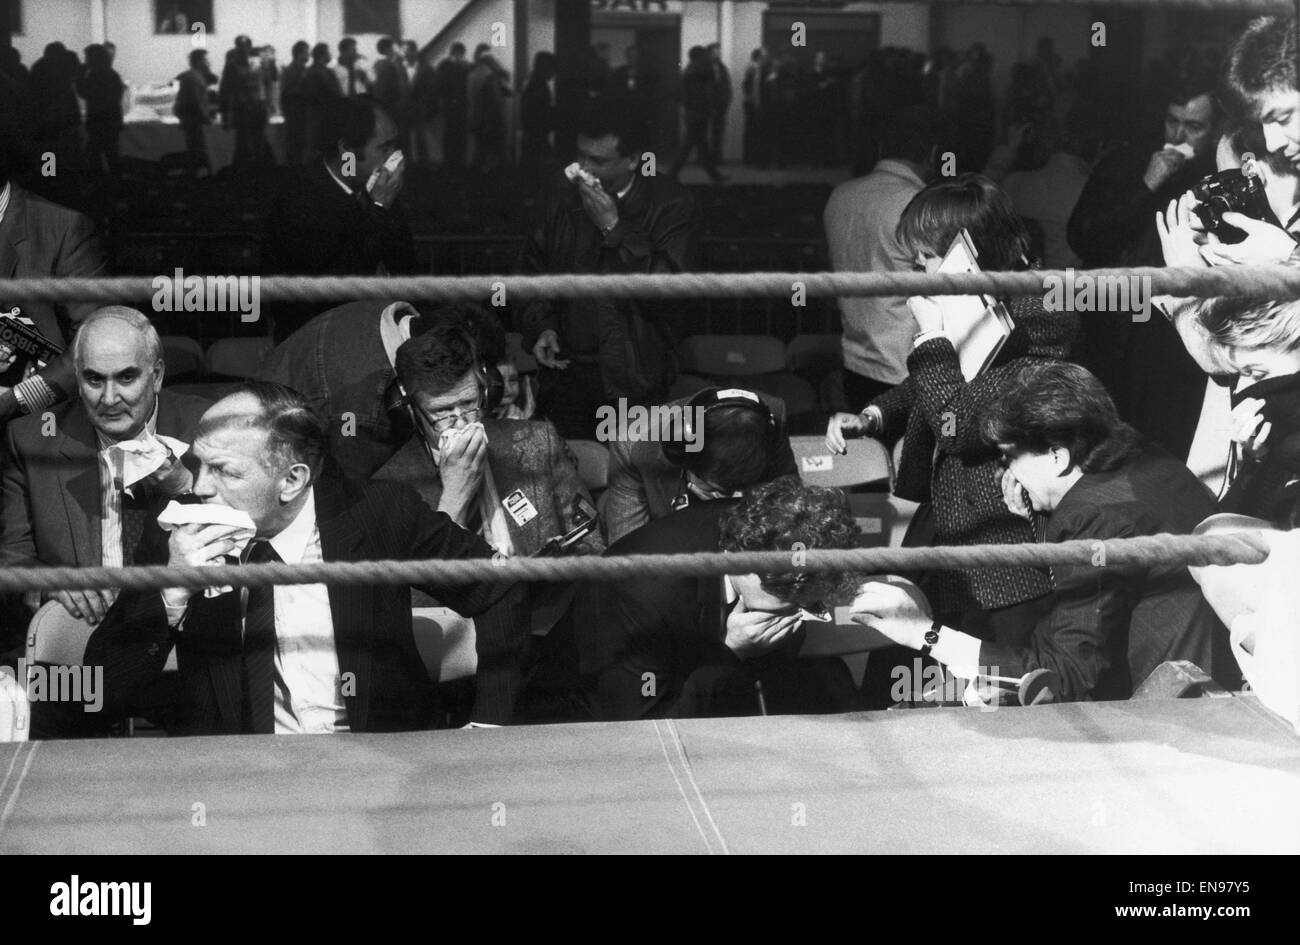 Tony Sibson v Frank Tate, 11th February 1988. A CS gas canister was thrown into the crowd. A mass brawl erupted as hundreds were overcome by fumes. Stock Photo